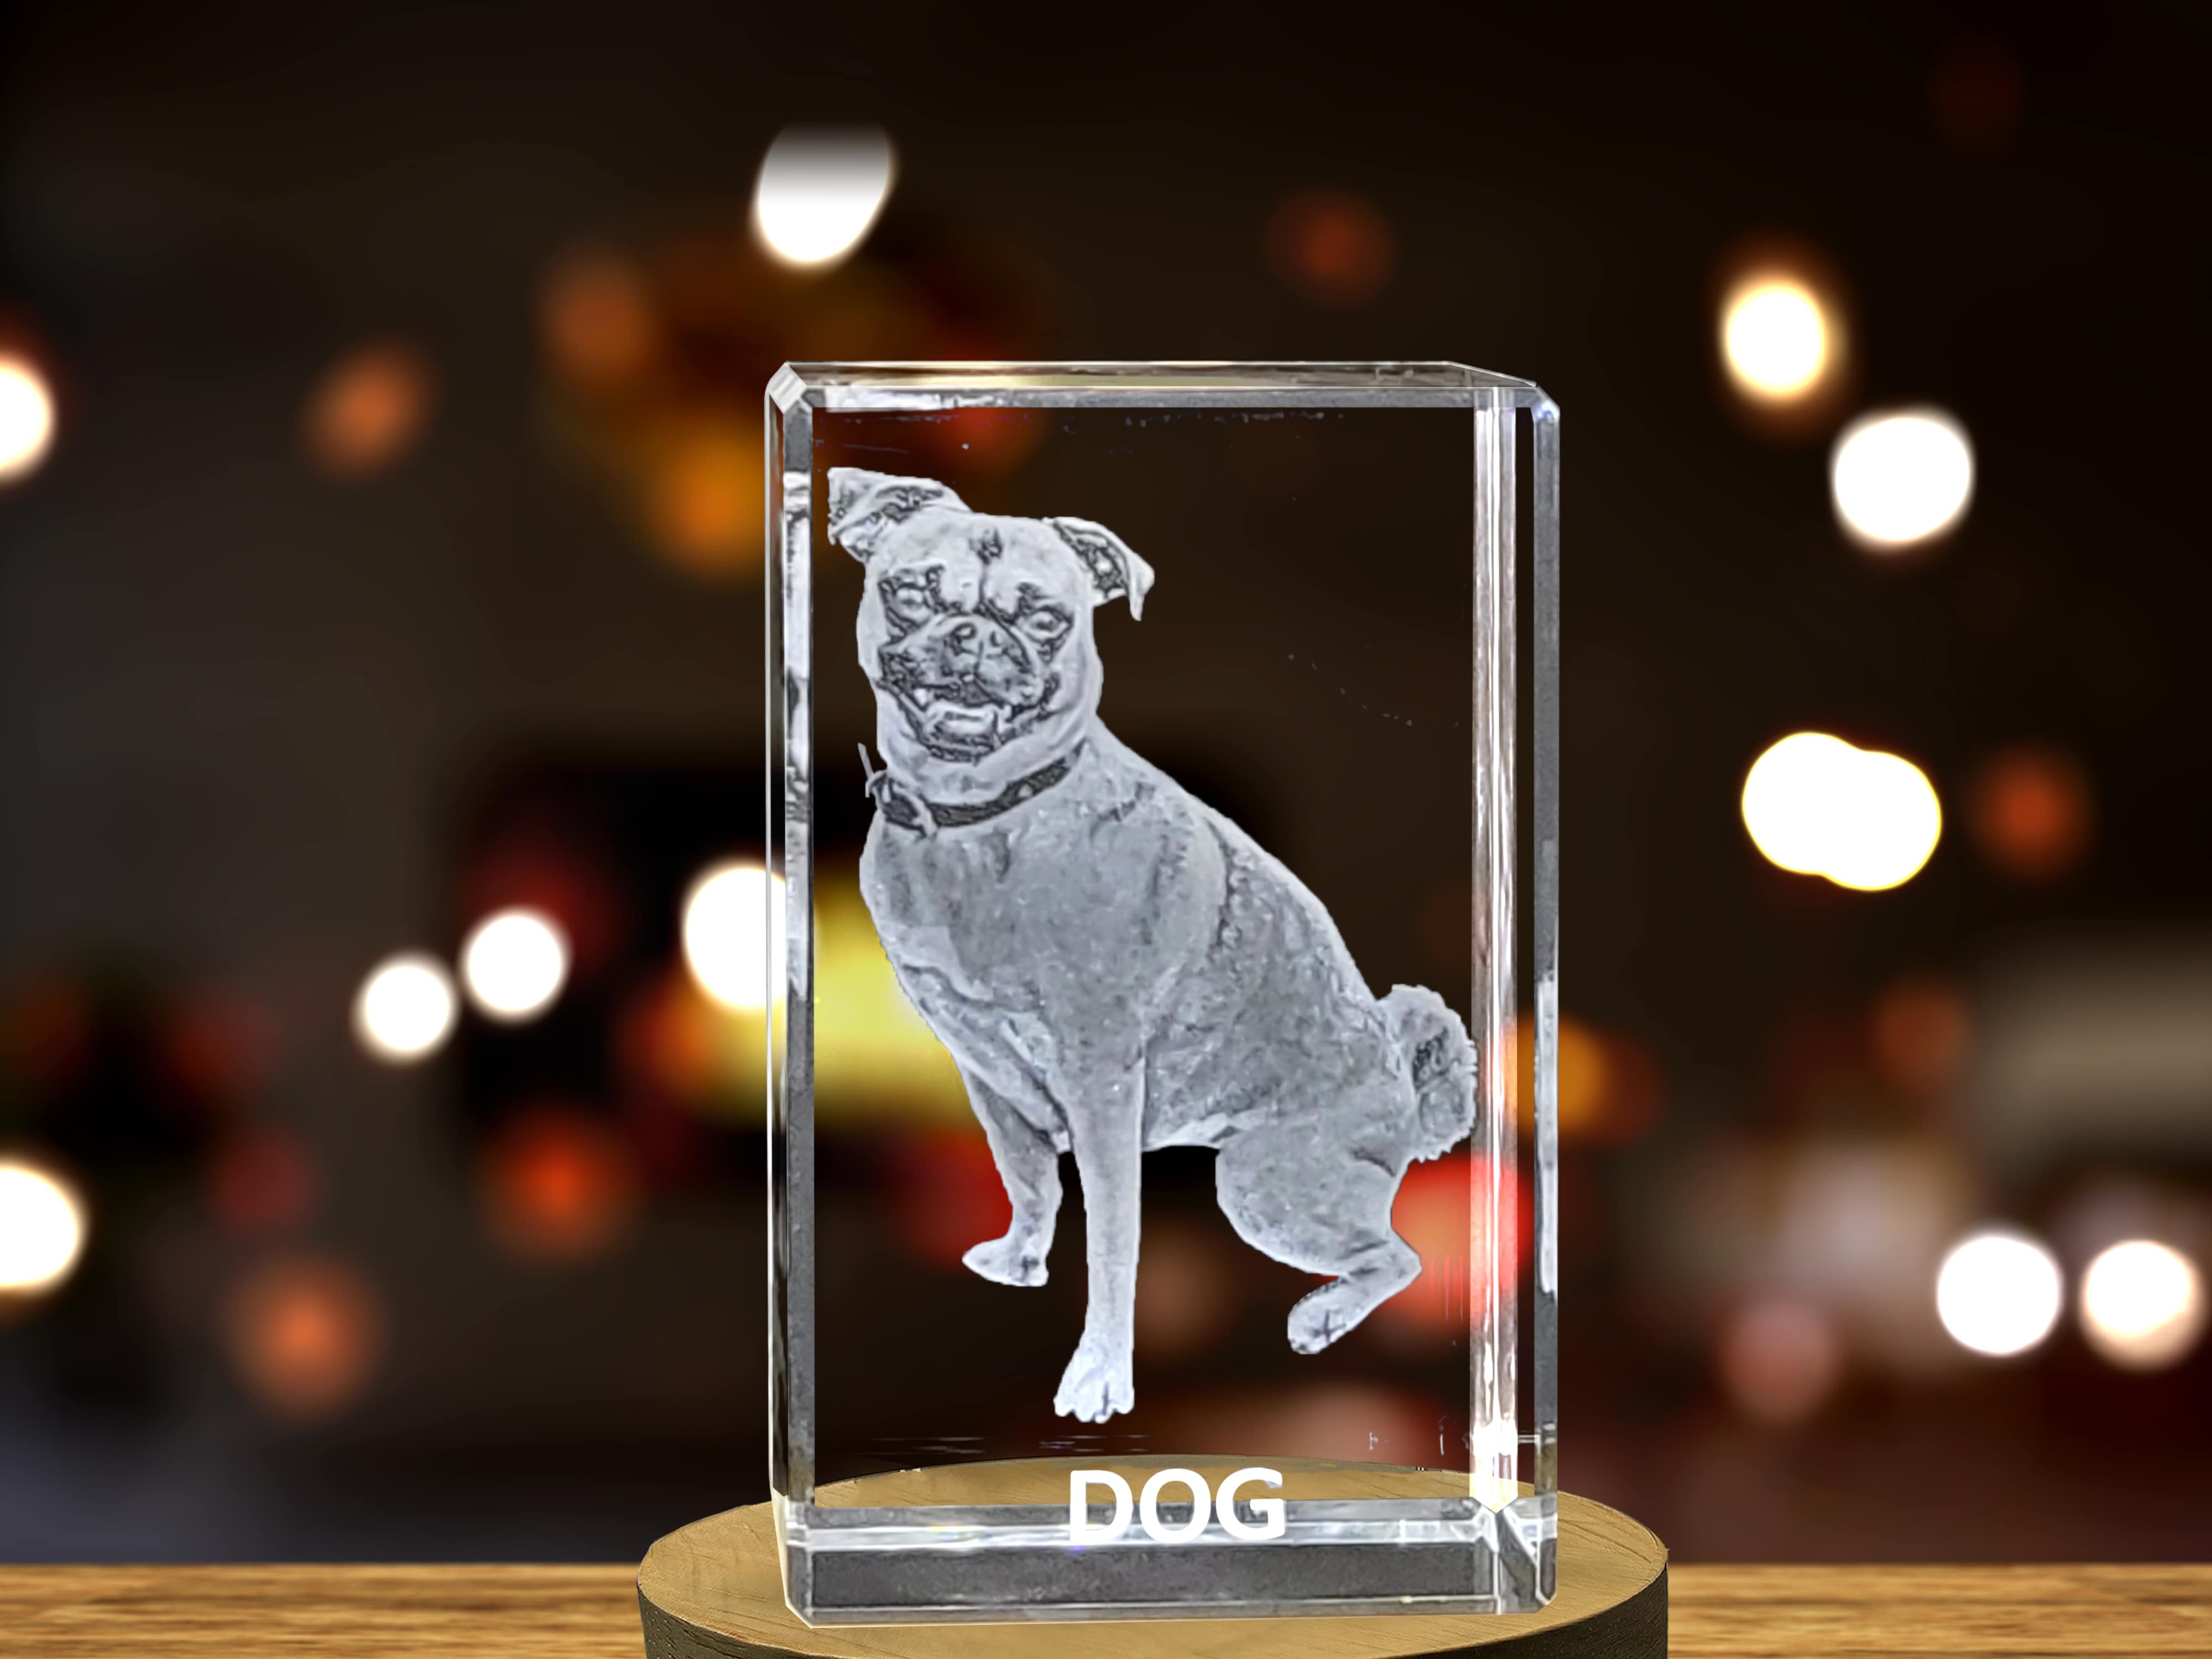 Beautiful 3D Engraved Crystal of a Loyal Dog - Perfect for Dog Lovers and Pet Owners A&B Crystal Collection